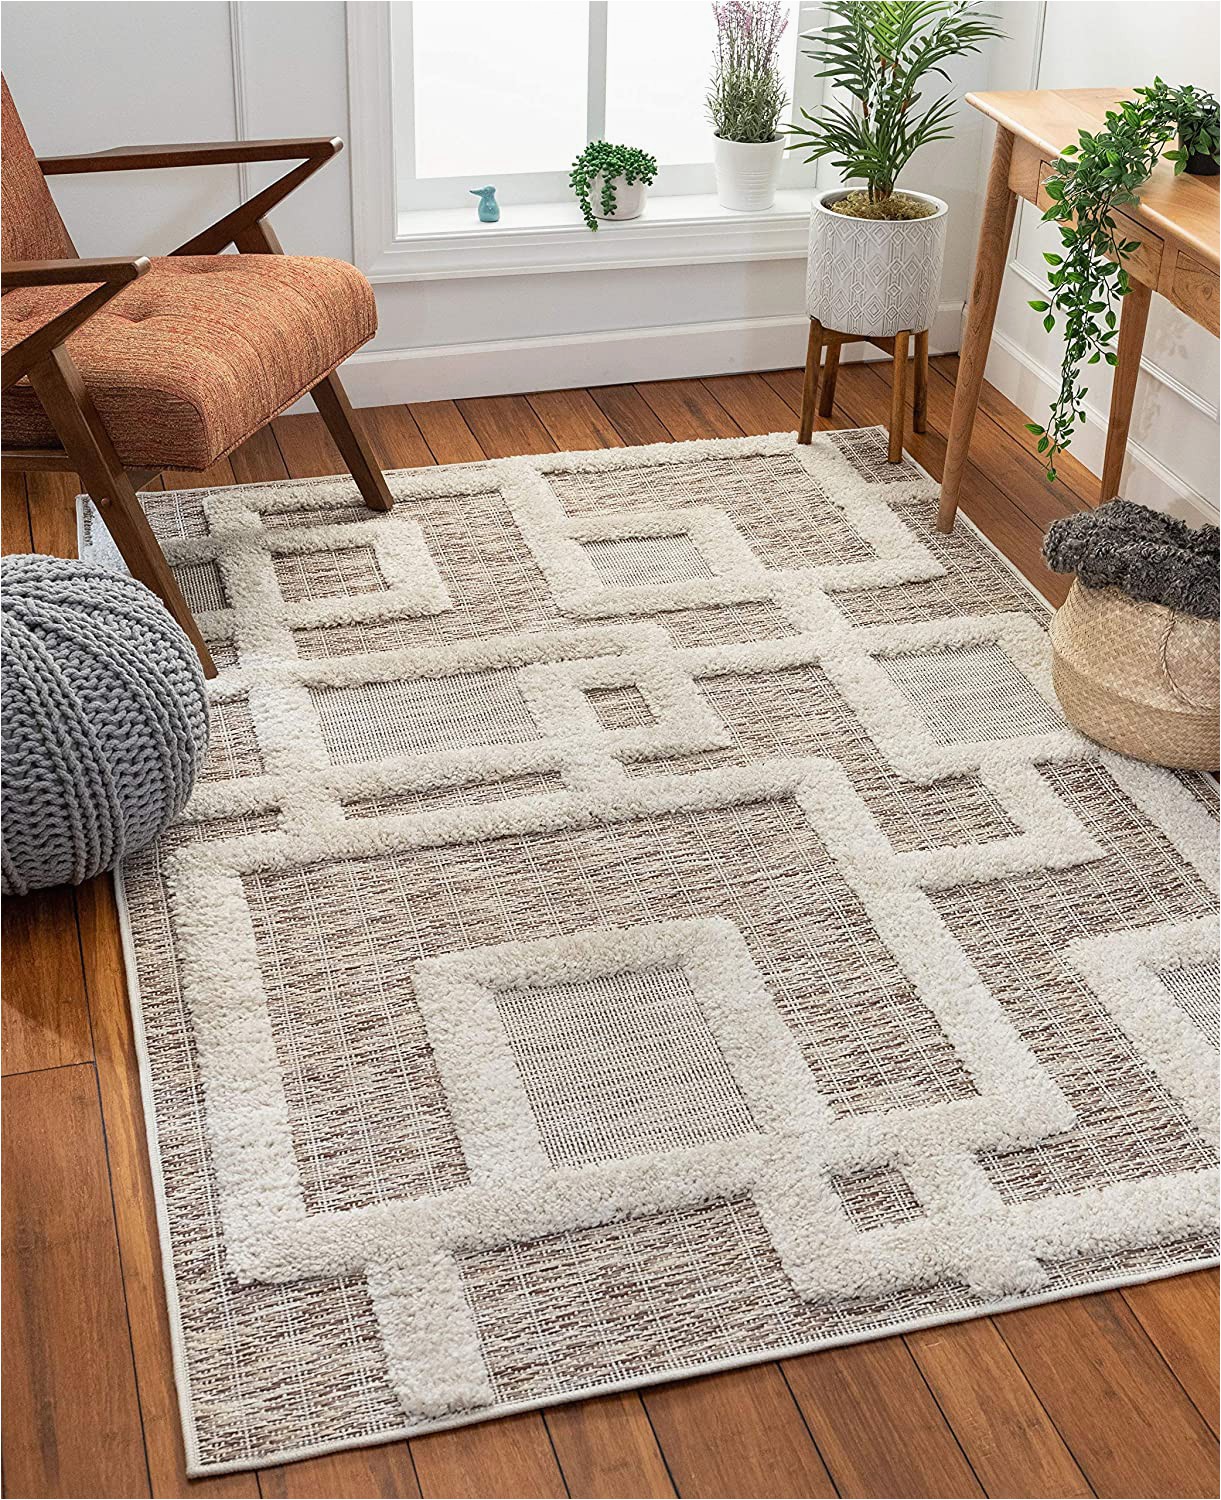 Low Pile White area Rug Well Woven Helga Beige Flat Weave Hi Low Pile Geometric Boxes area Rug 5×7 5 3" X 7 3"